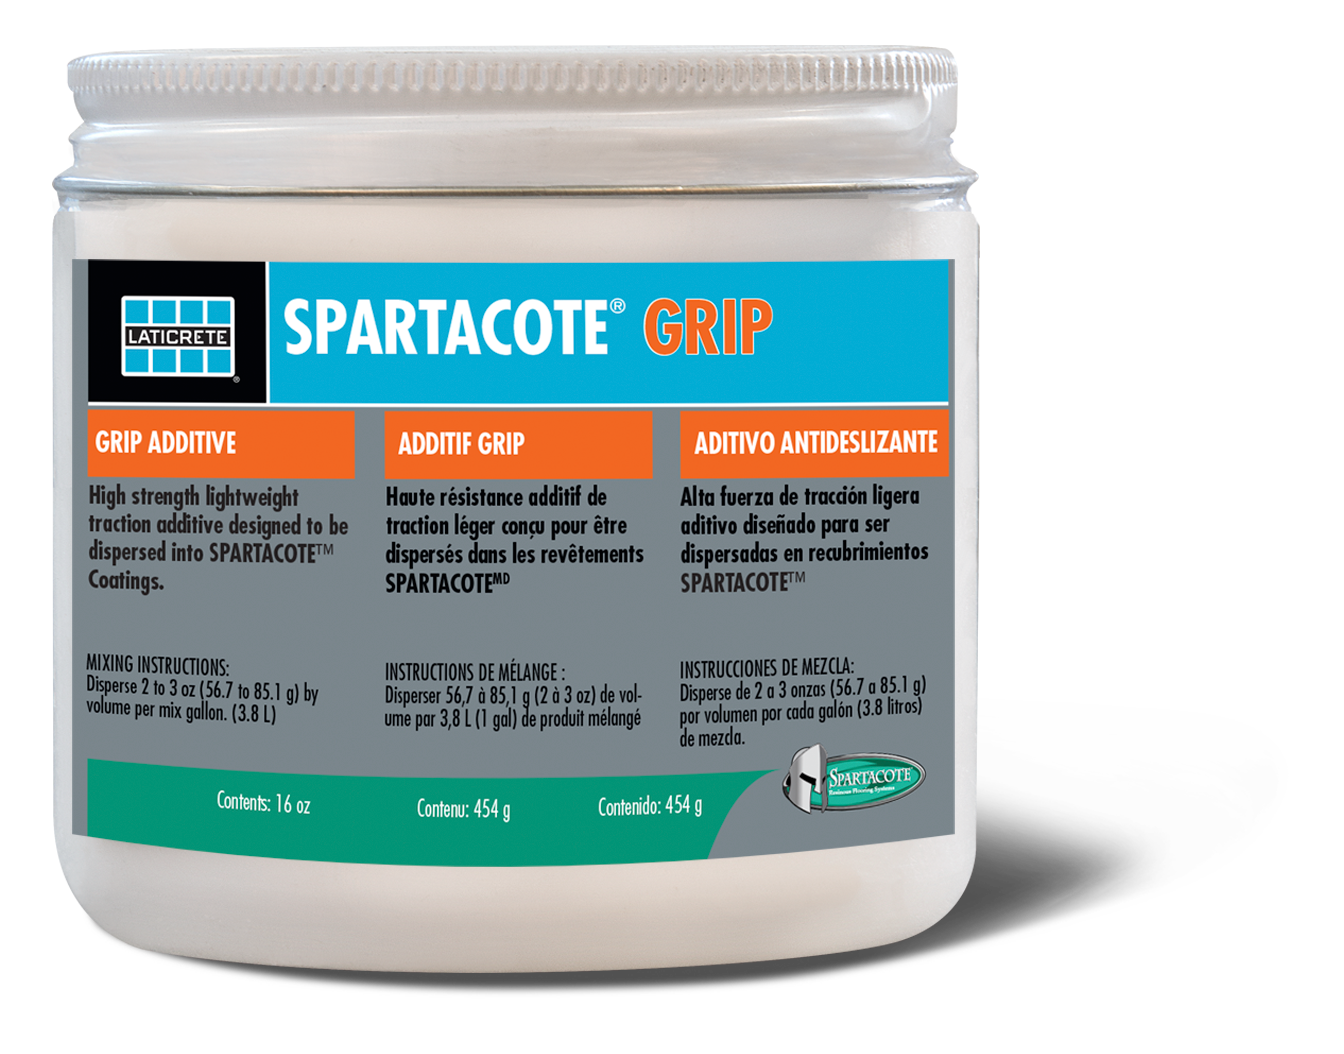 SPARTACOTE® GRIP Traction Additive